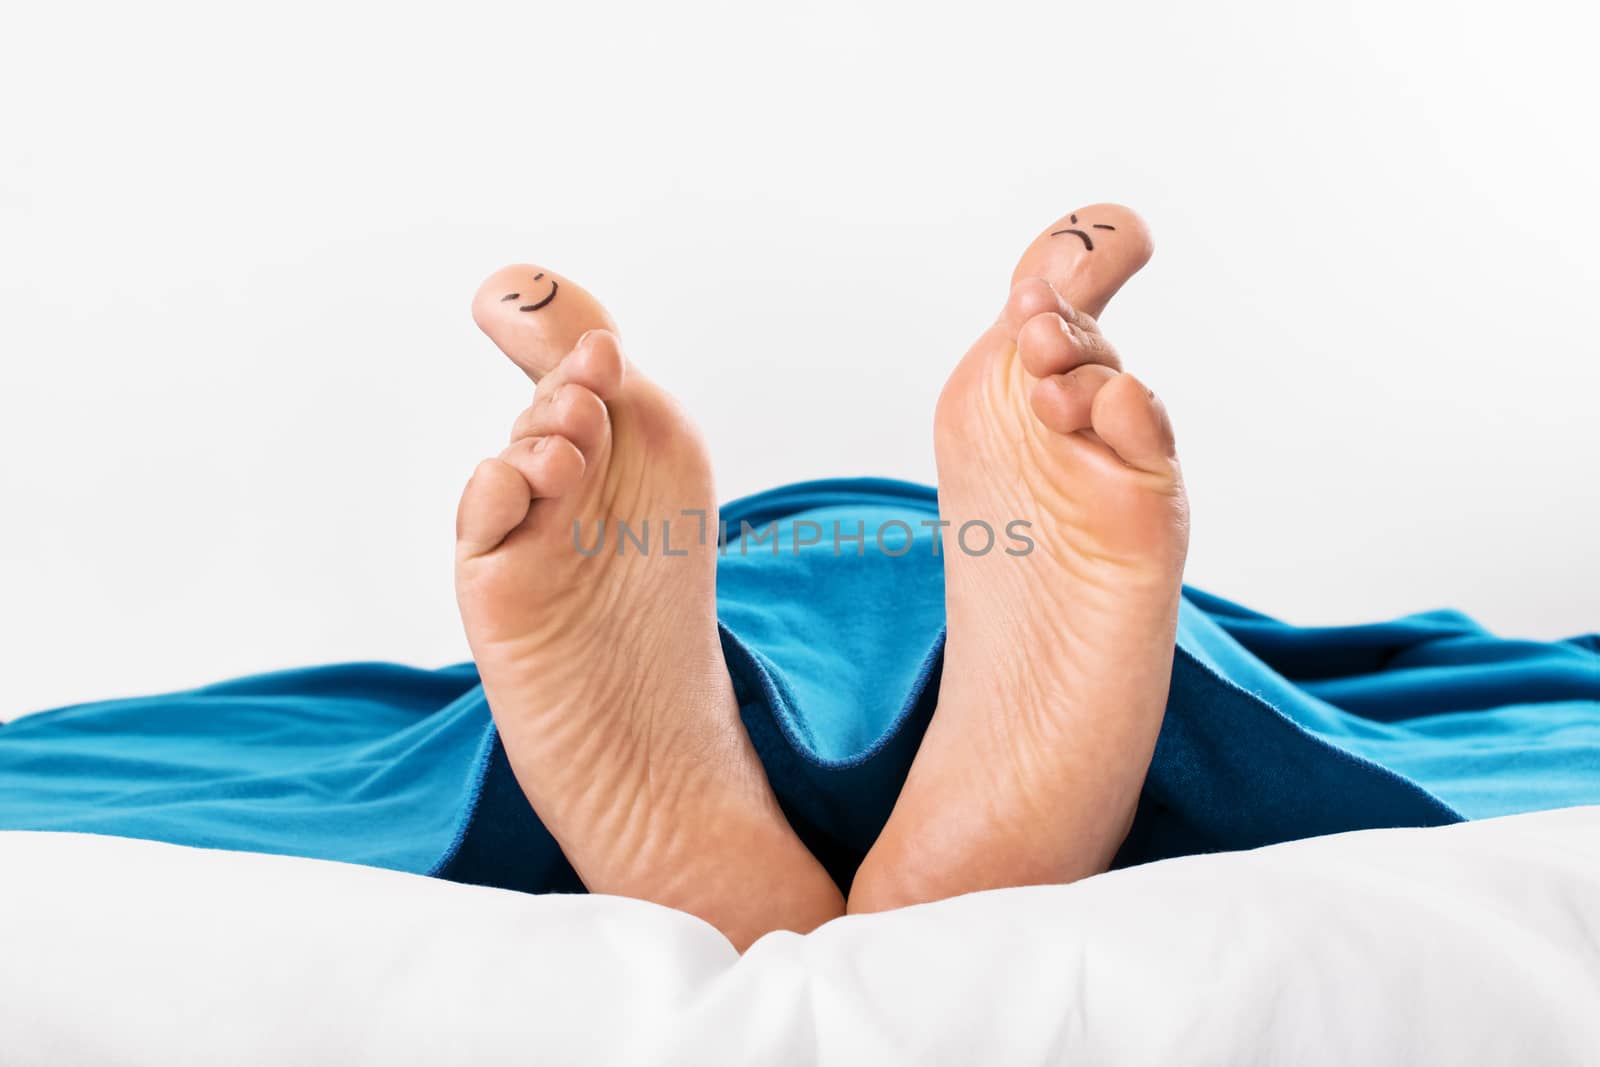 Human feet with smiley and grumpy drawn on them by Mendelex